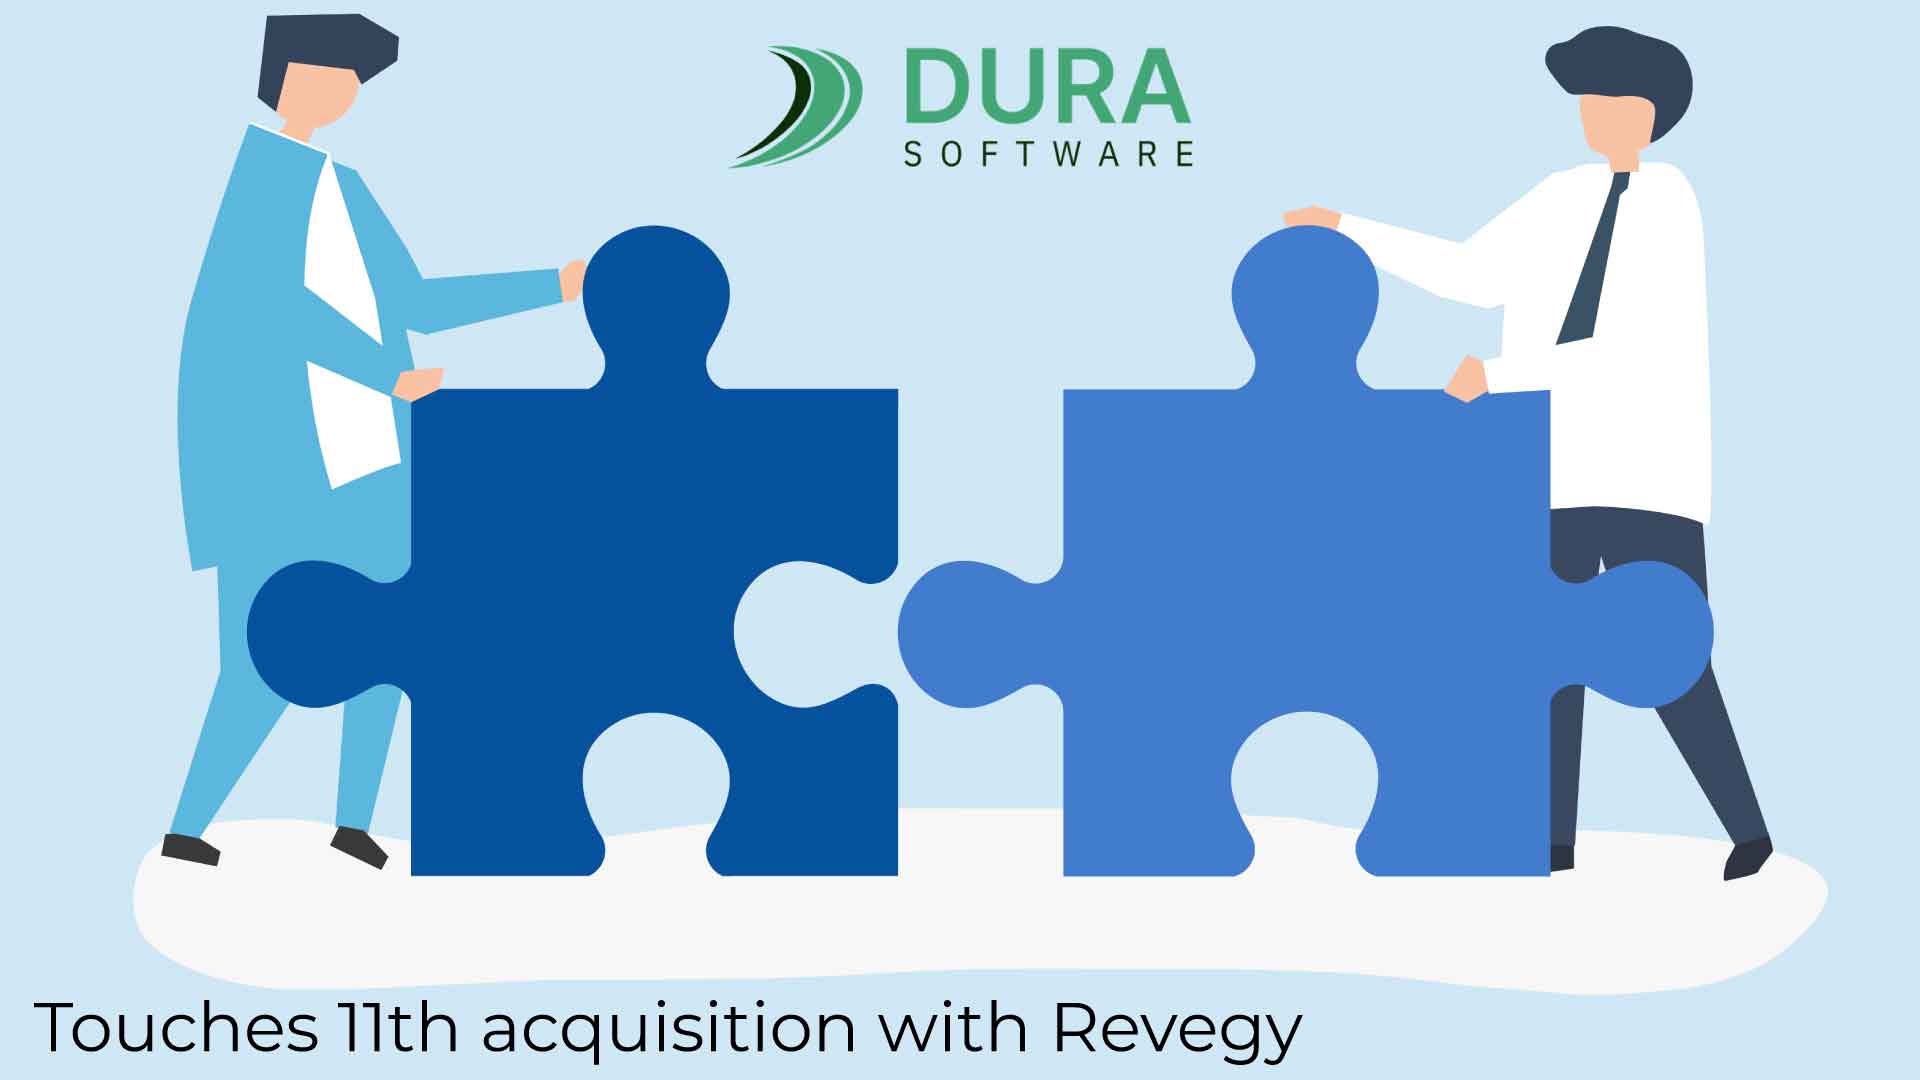 Dura Software Acquires Revegy, a Leader in Sales Optimization Software